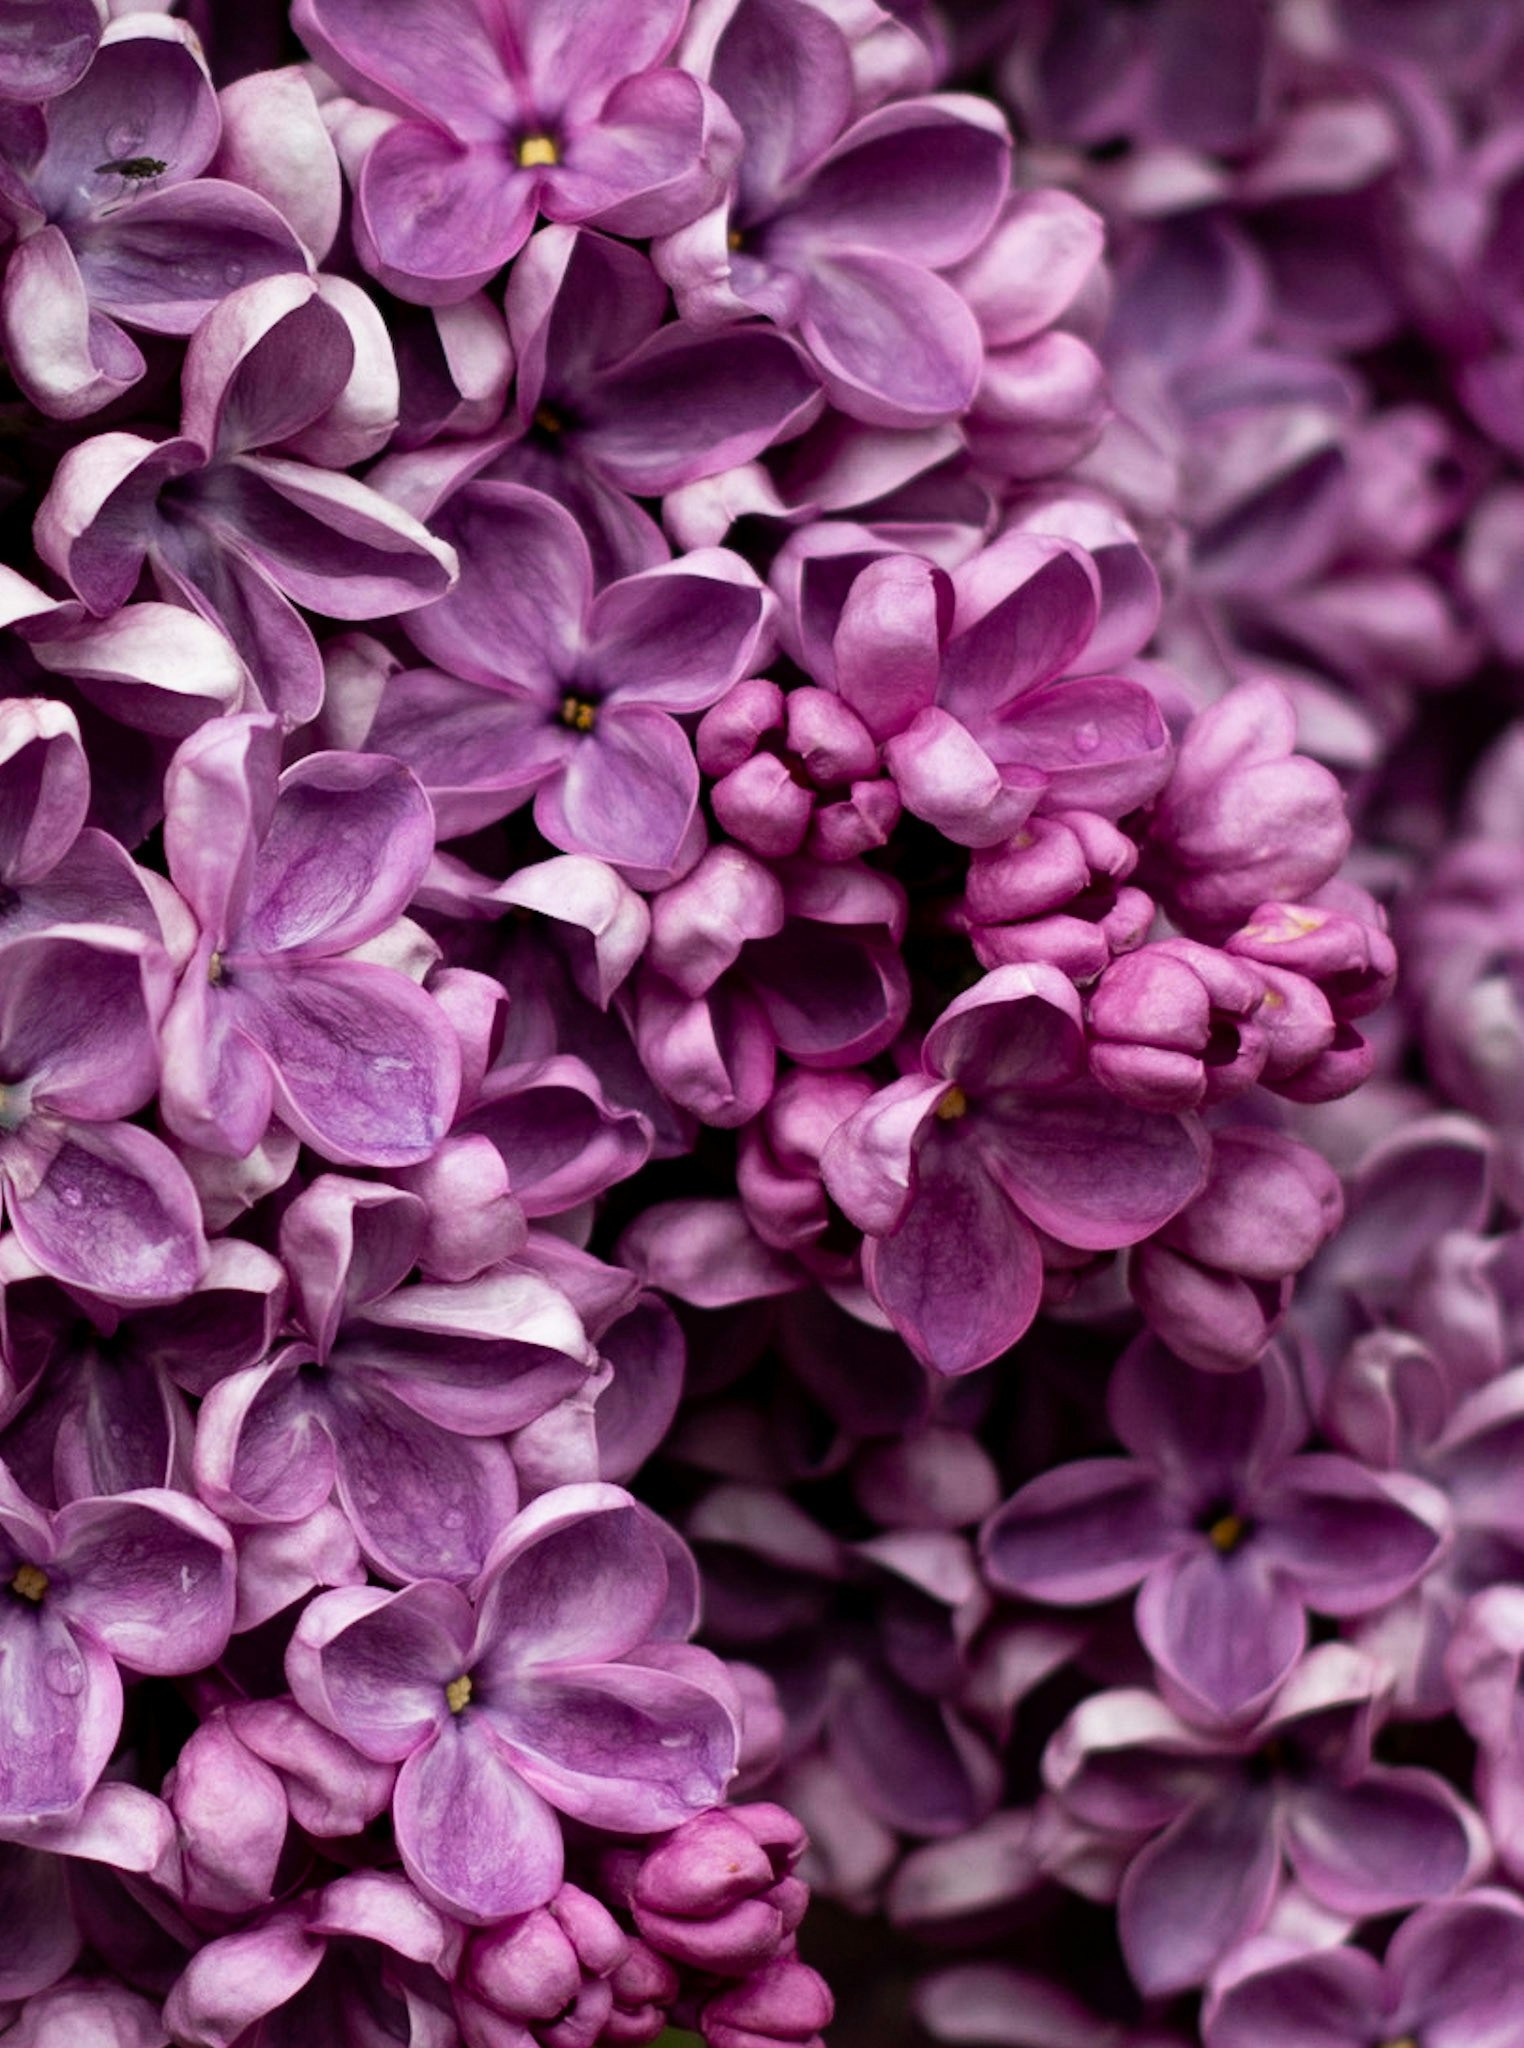 lilac flower pictures | download free images on unsplash